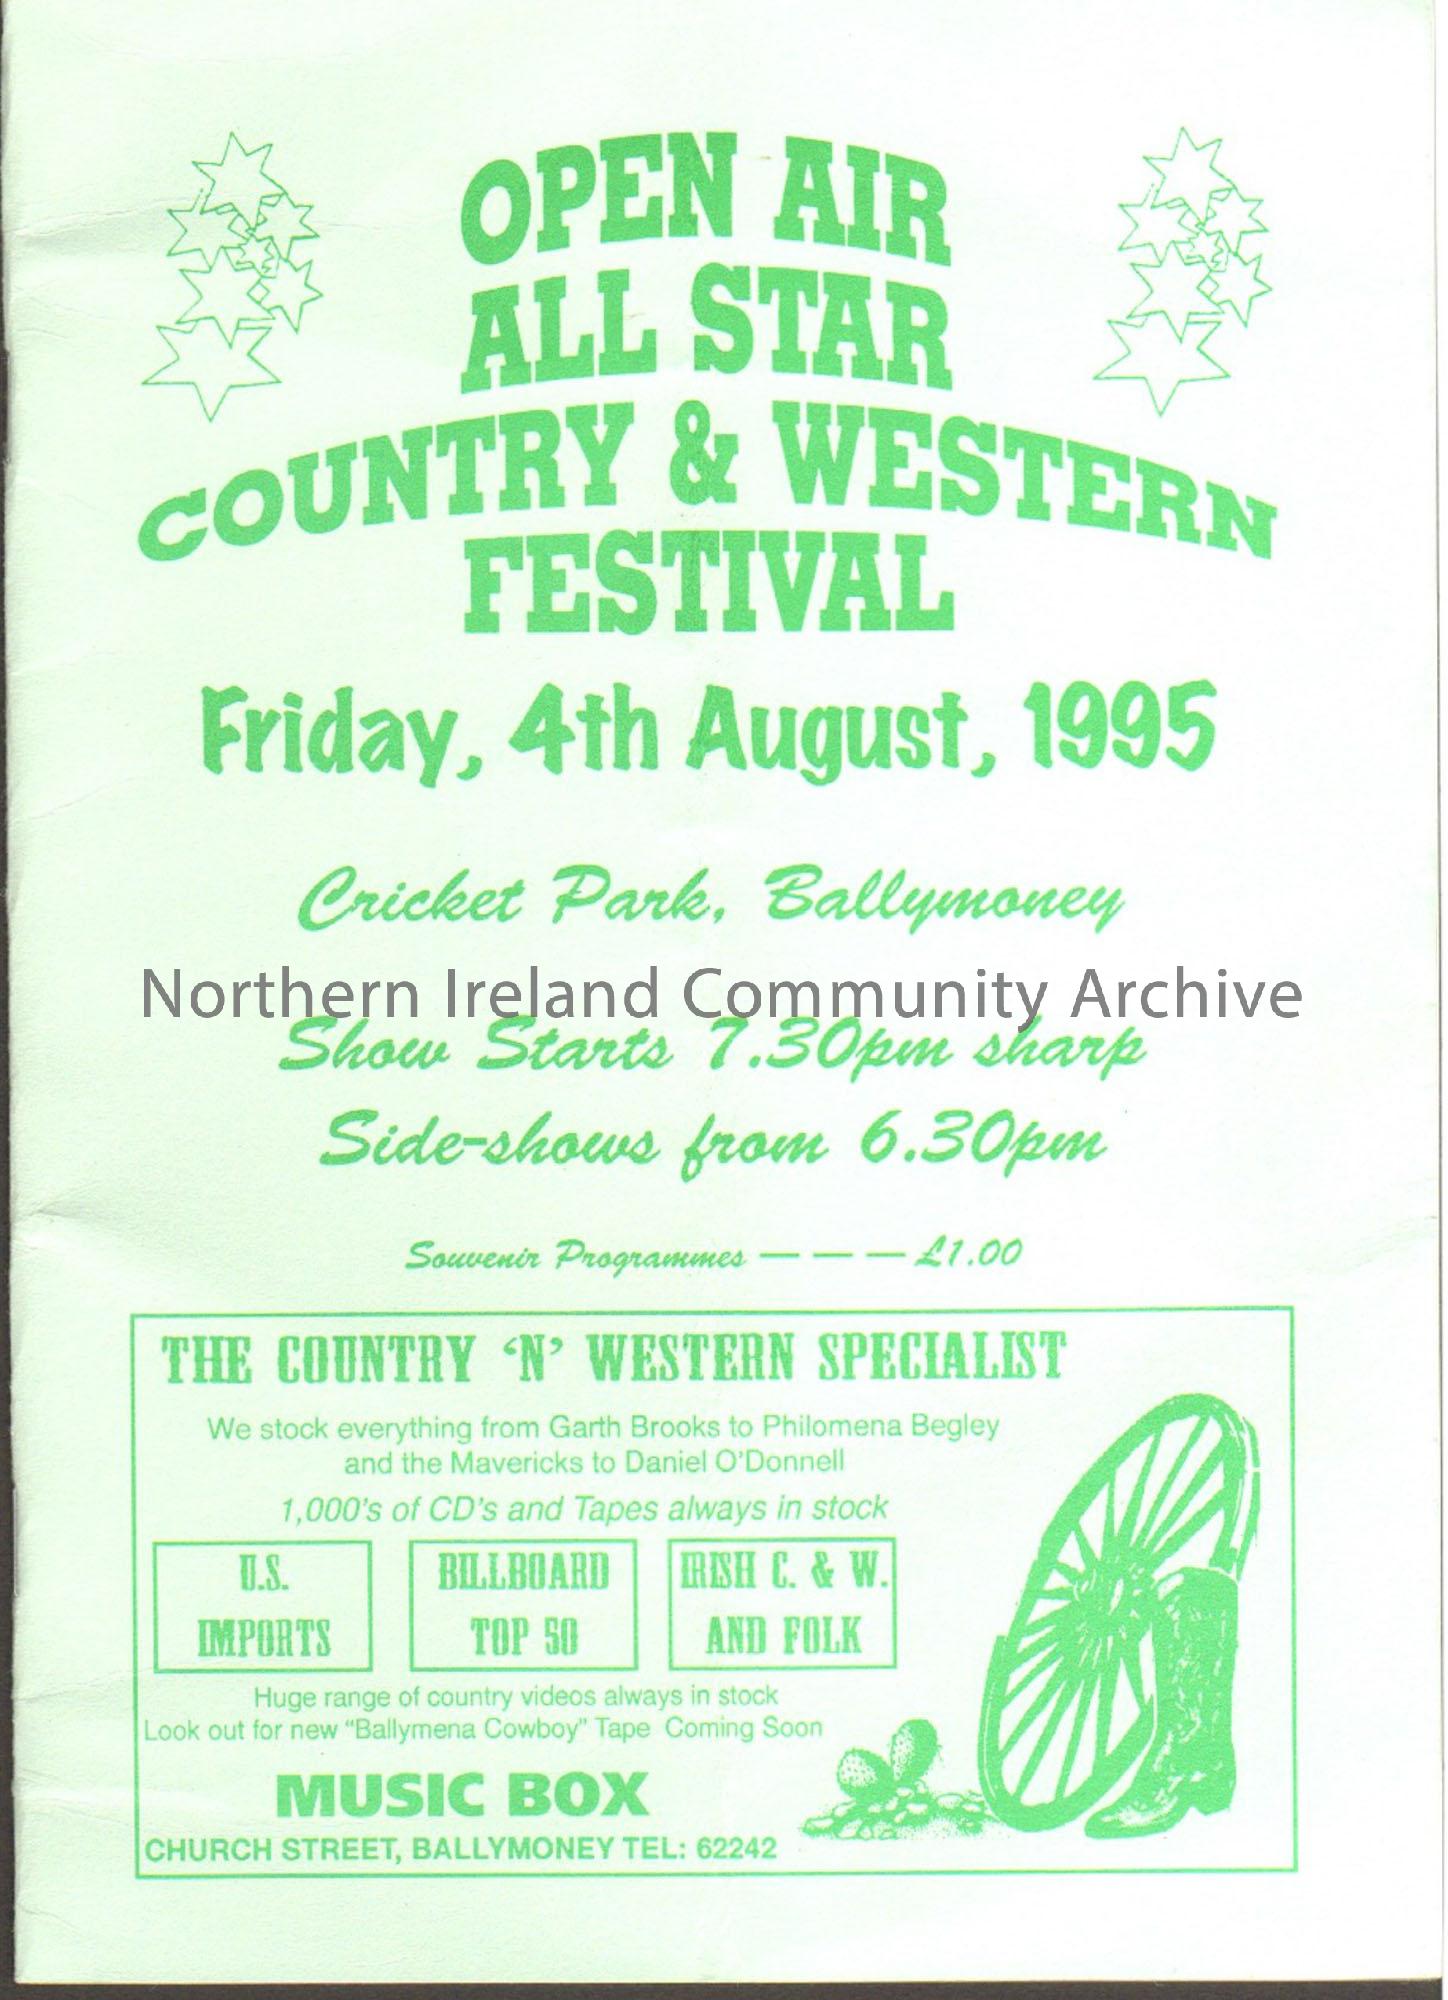 Open Air All Star Country & Western Festival, Friday 4th August 1995. Light green cover with dark green writing. Image of a boot by a wagon wheel at t…